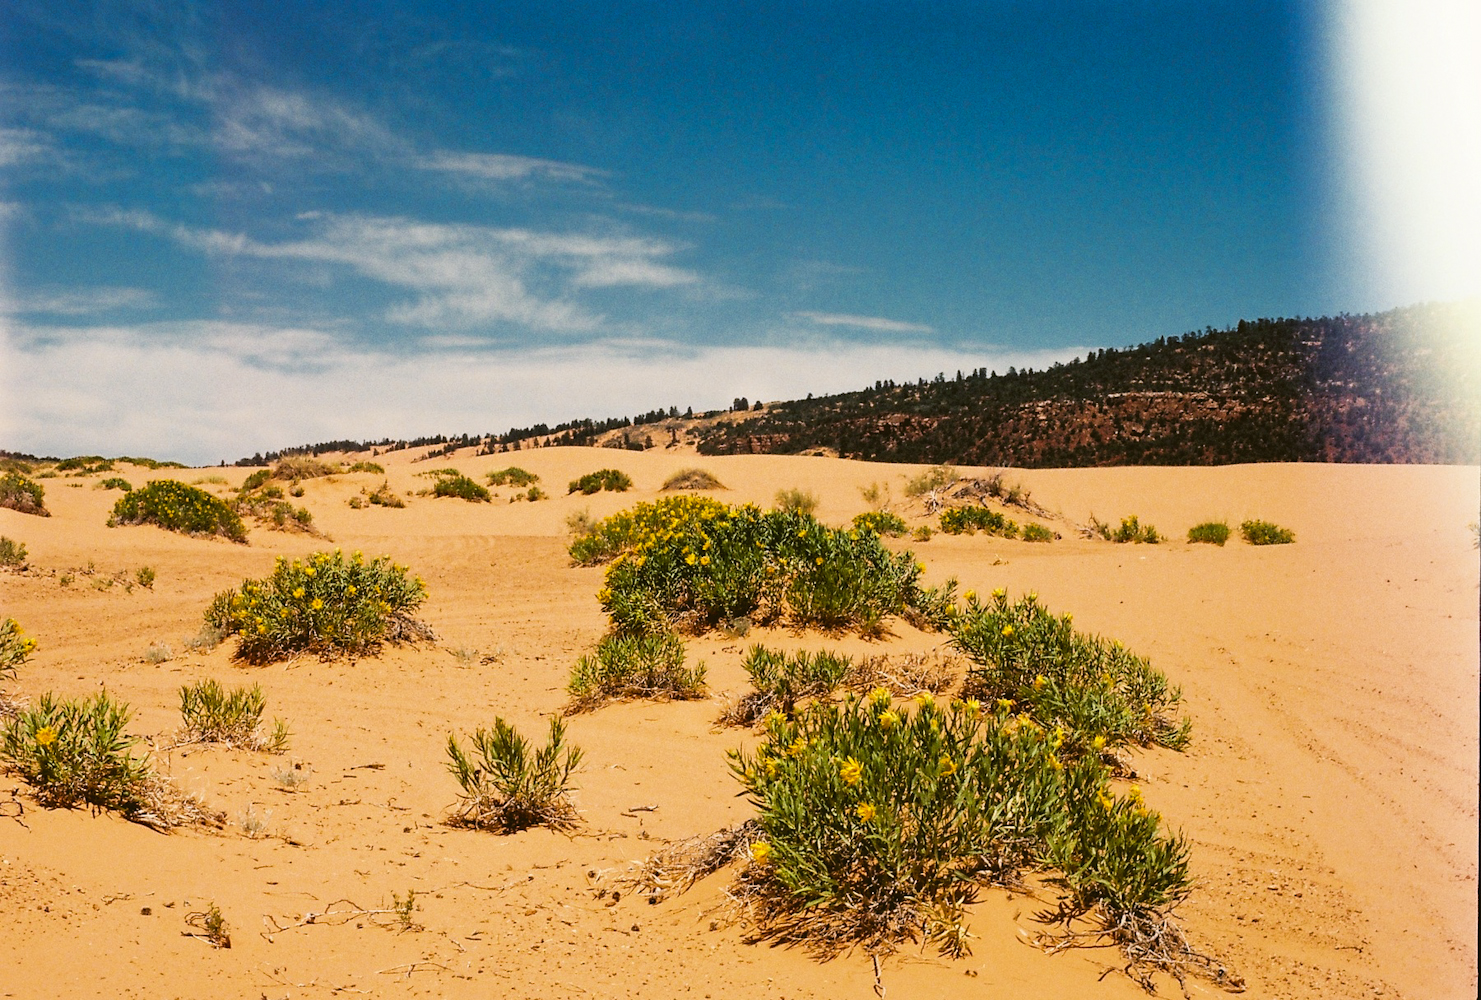 Coral Sand Dunes